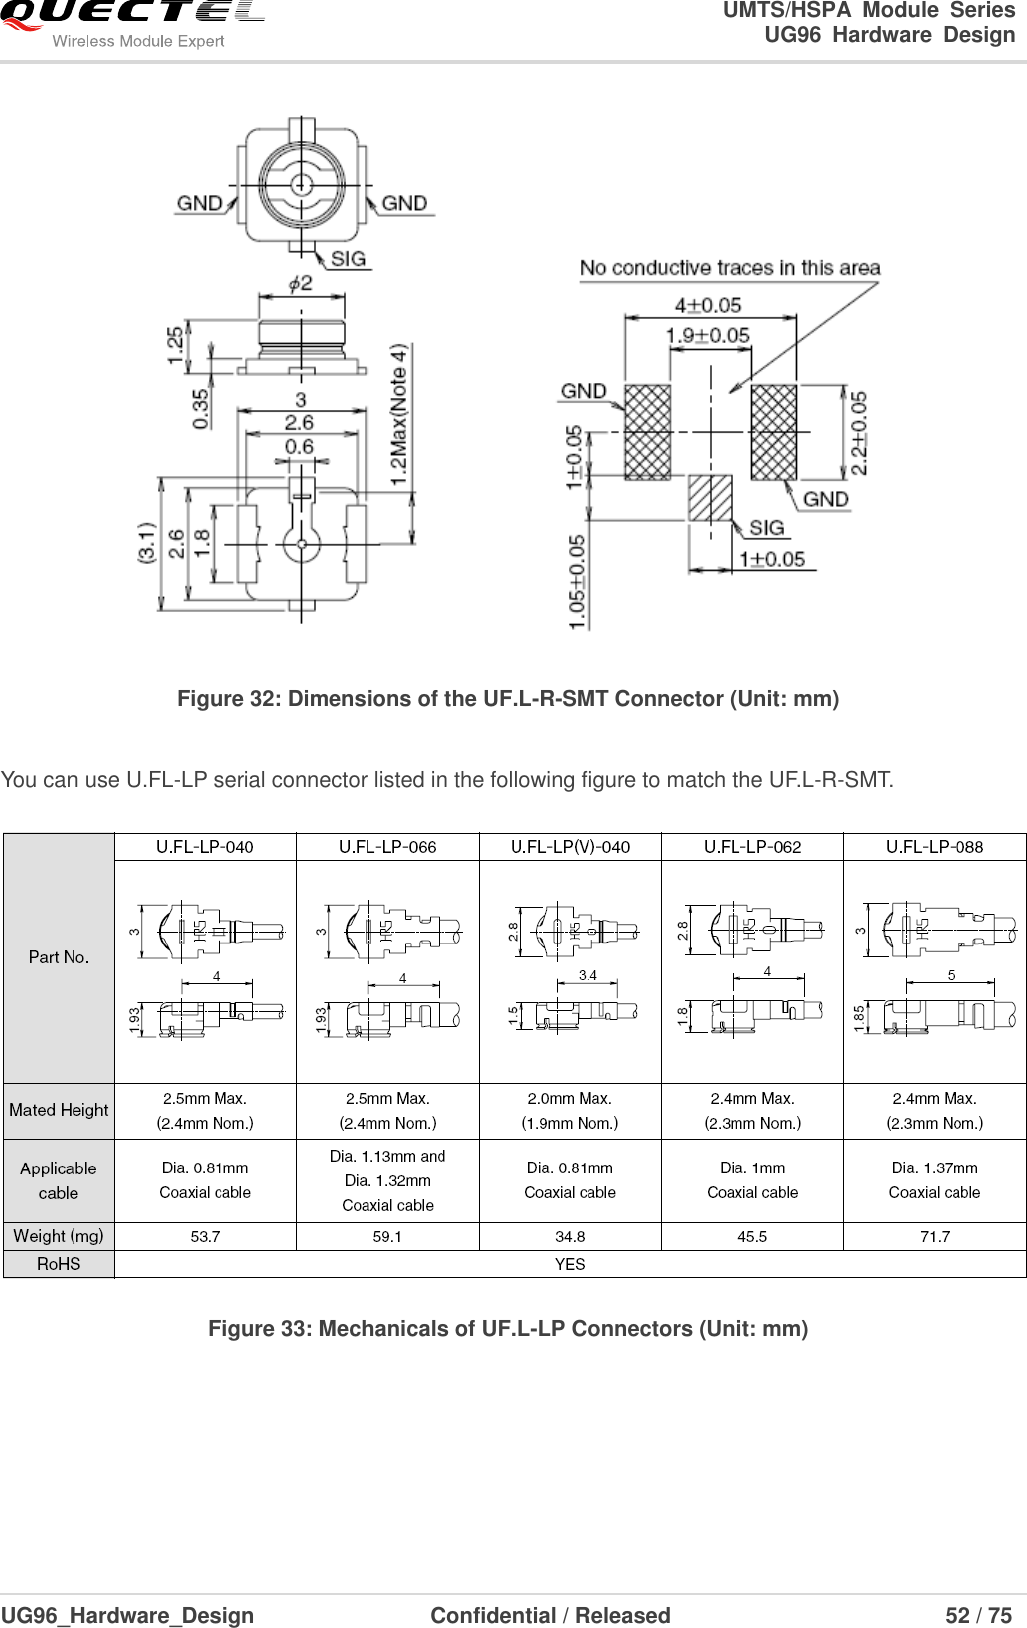                                                                        UMTS/HSPA  Module  Series                                                                 UG96  Hardware  Design  UG96_Hardware_Design                  Confidential / Released                             52 / 75     Figure 32: Dimensions of the UF.L-R-SMT Connector (Unit: mm)  You can use U.FL-LP serial connector listed in the following figure to match the UF.L-R-SMT.   Figure 33: Mechanicals of UF.L-LP Connectors (Unit: mm)       